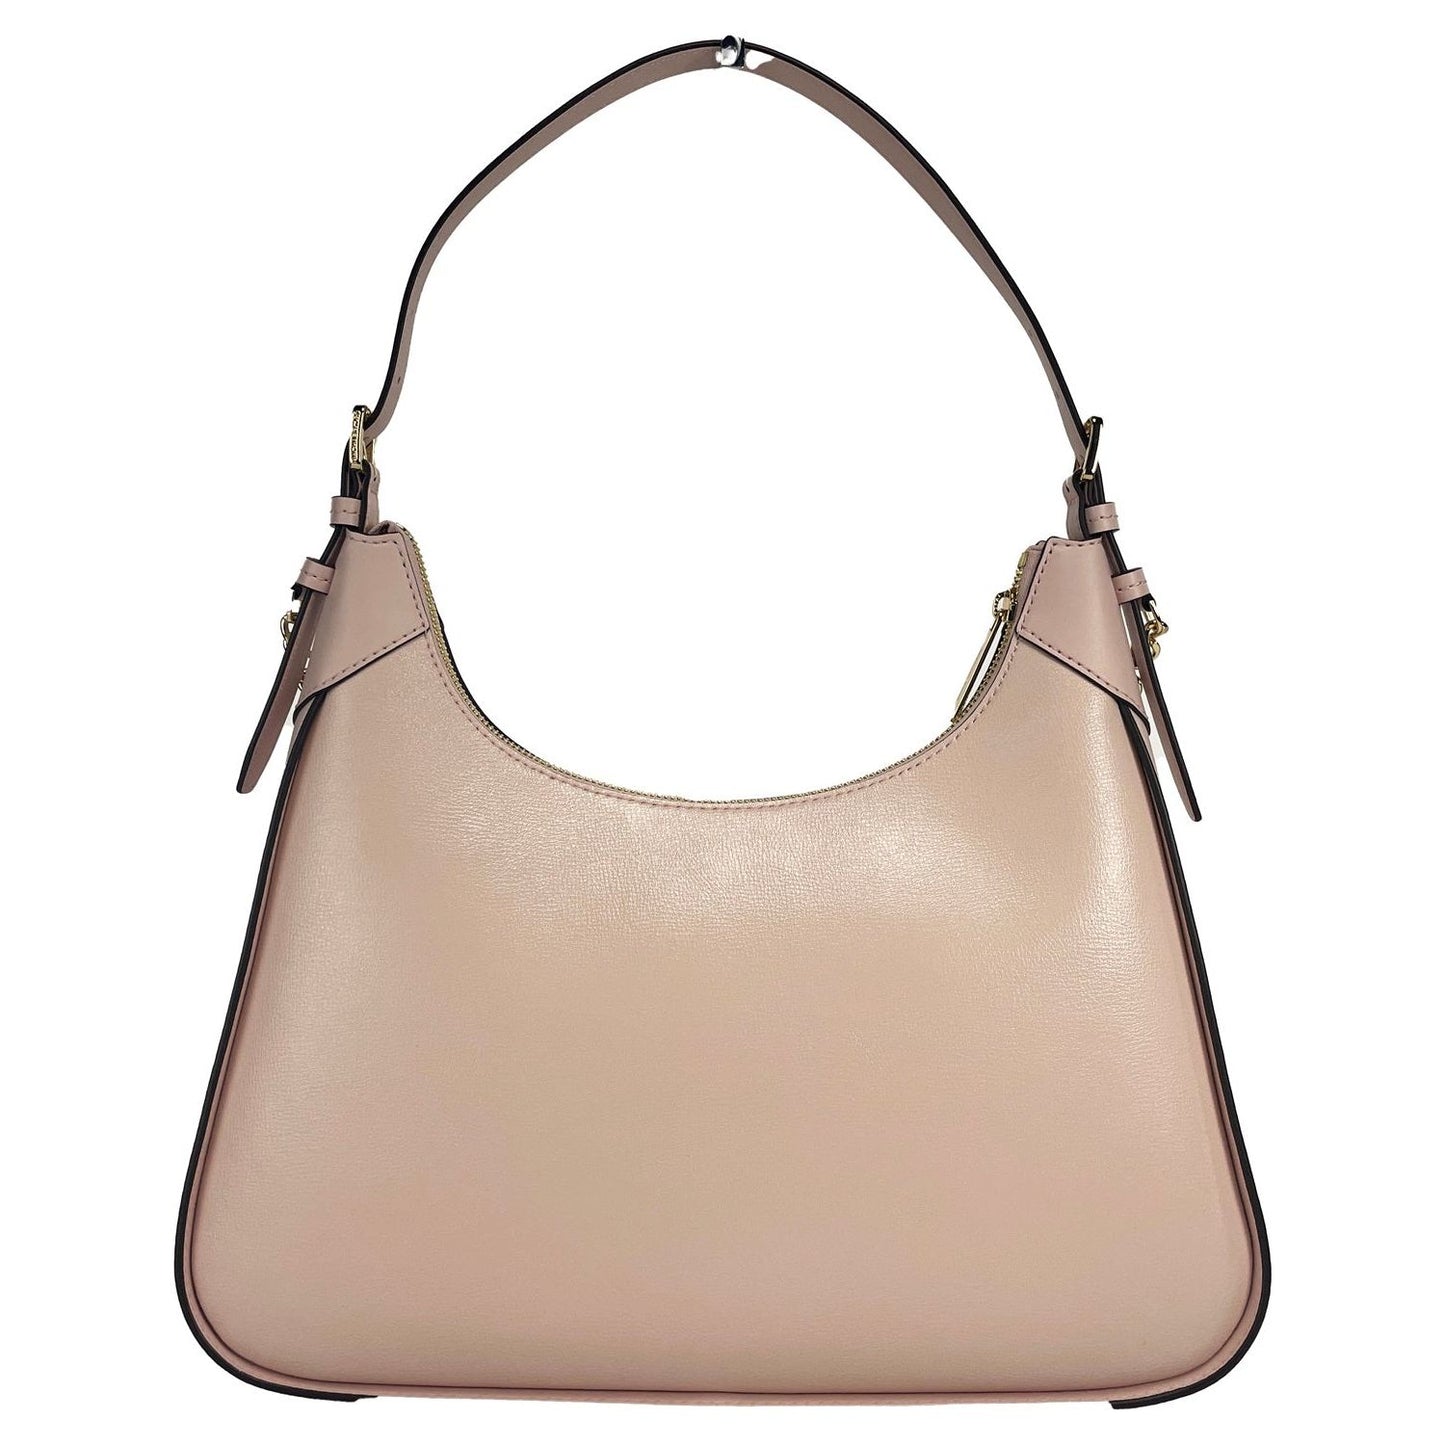 Michael Kors Wilma Large Smooth Leather Chain Shoulder Bag Purse Powder Blush wilma-large-smooth-leather-chain-shoulder-bag-purse-powder-blush